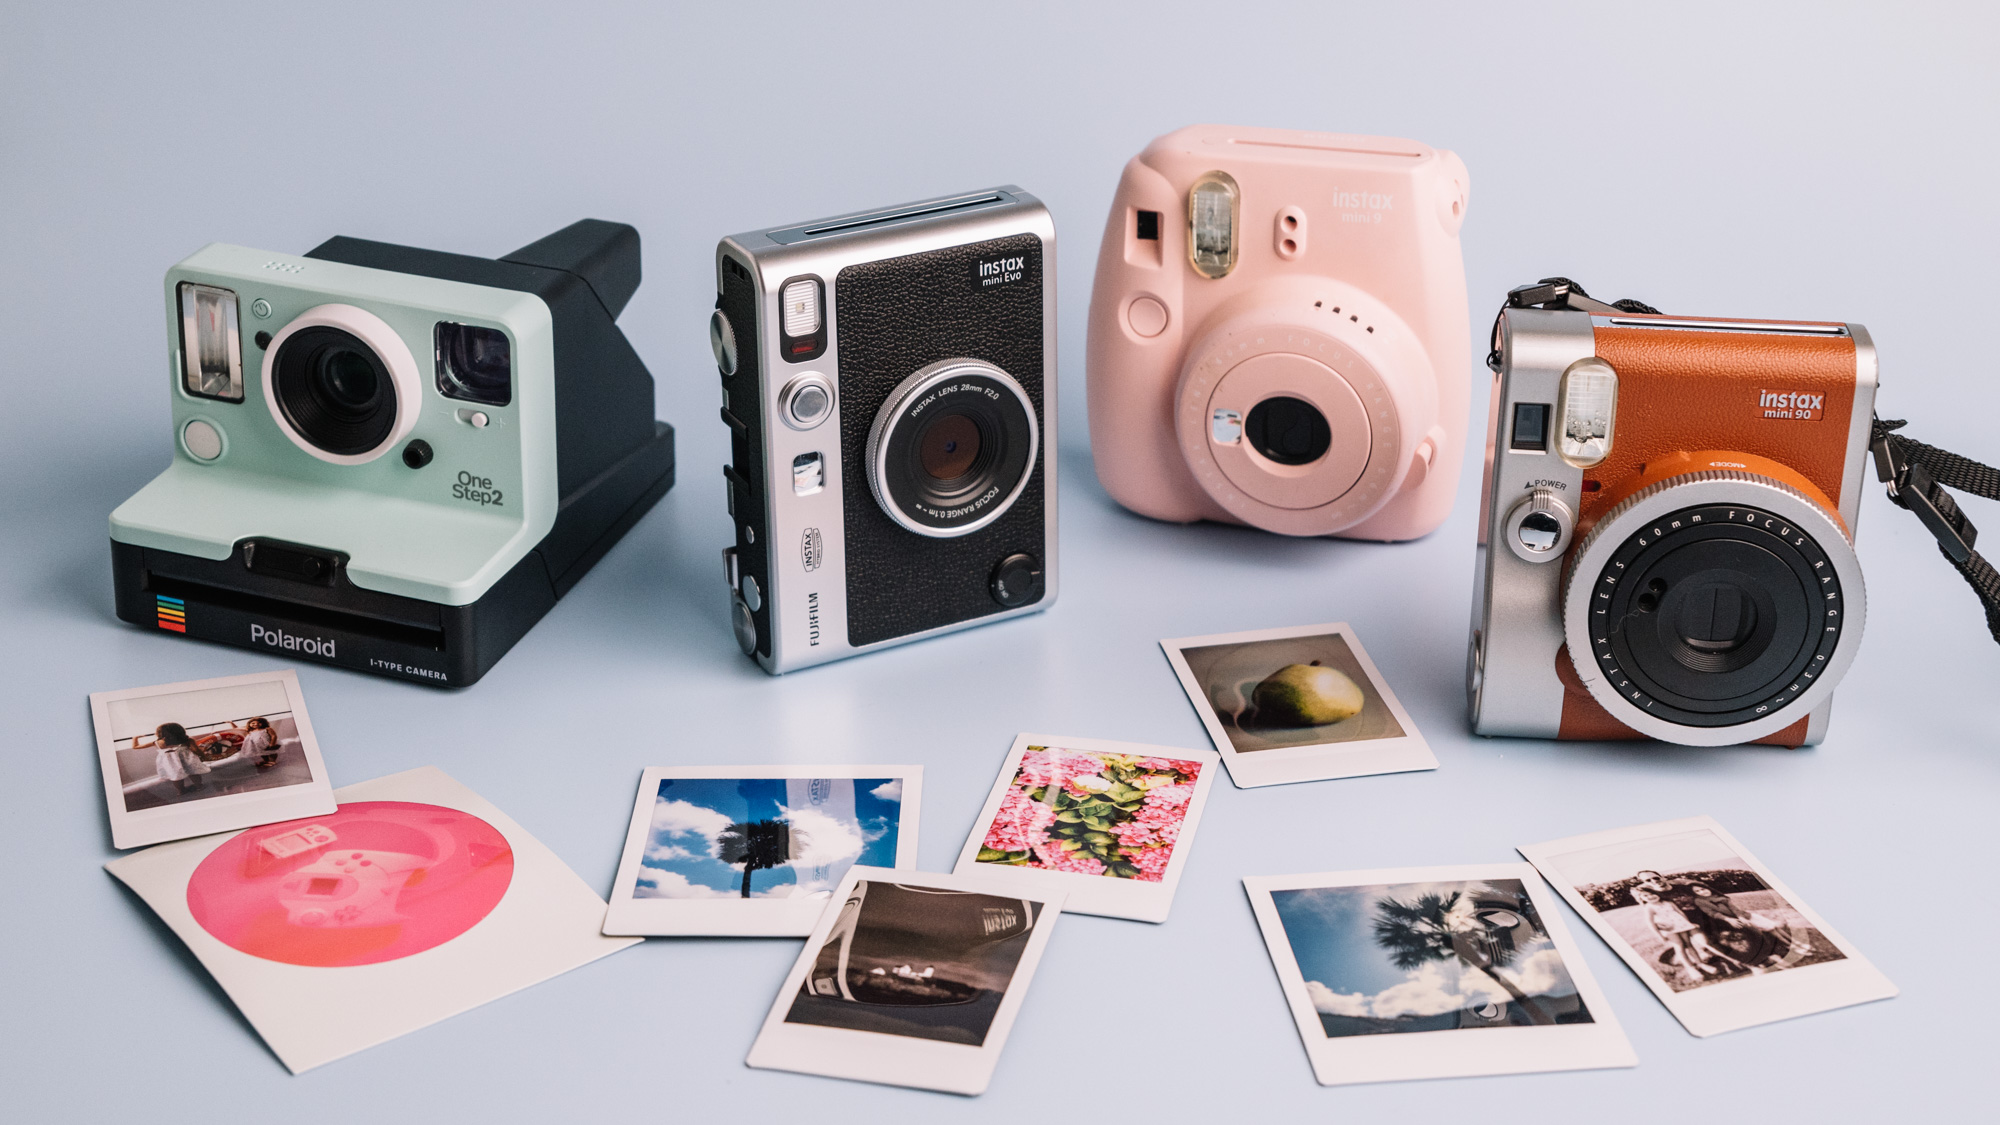 Polaroid Go vs Polaroid Now: which is the best instant camera for